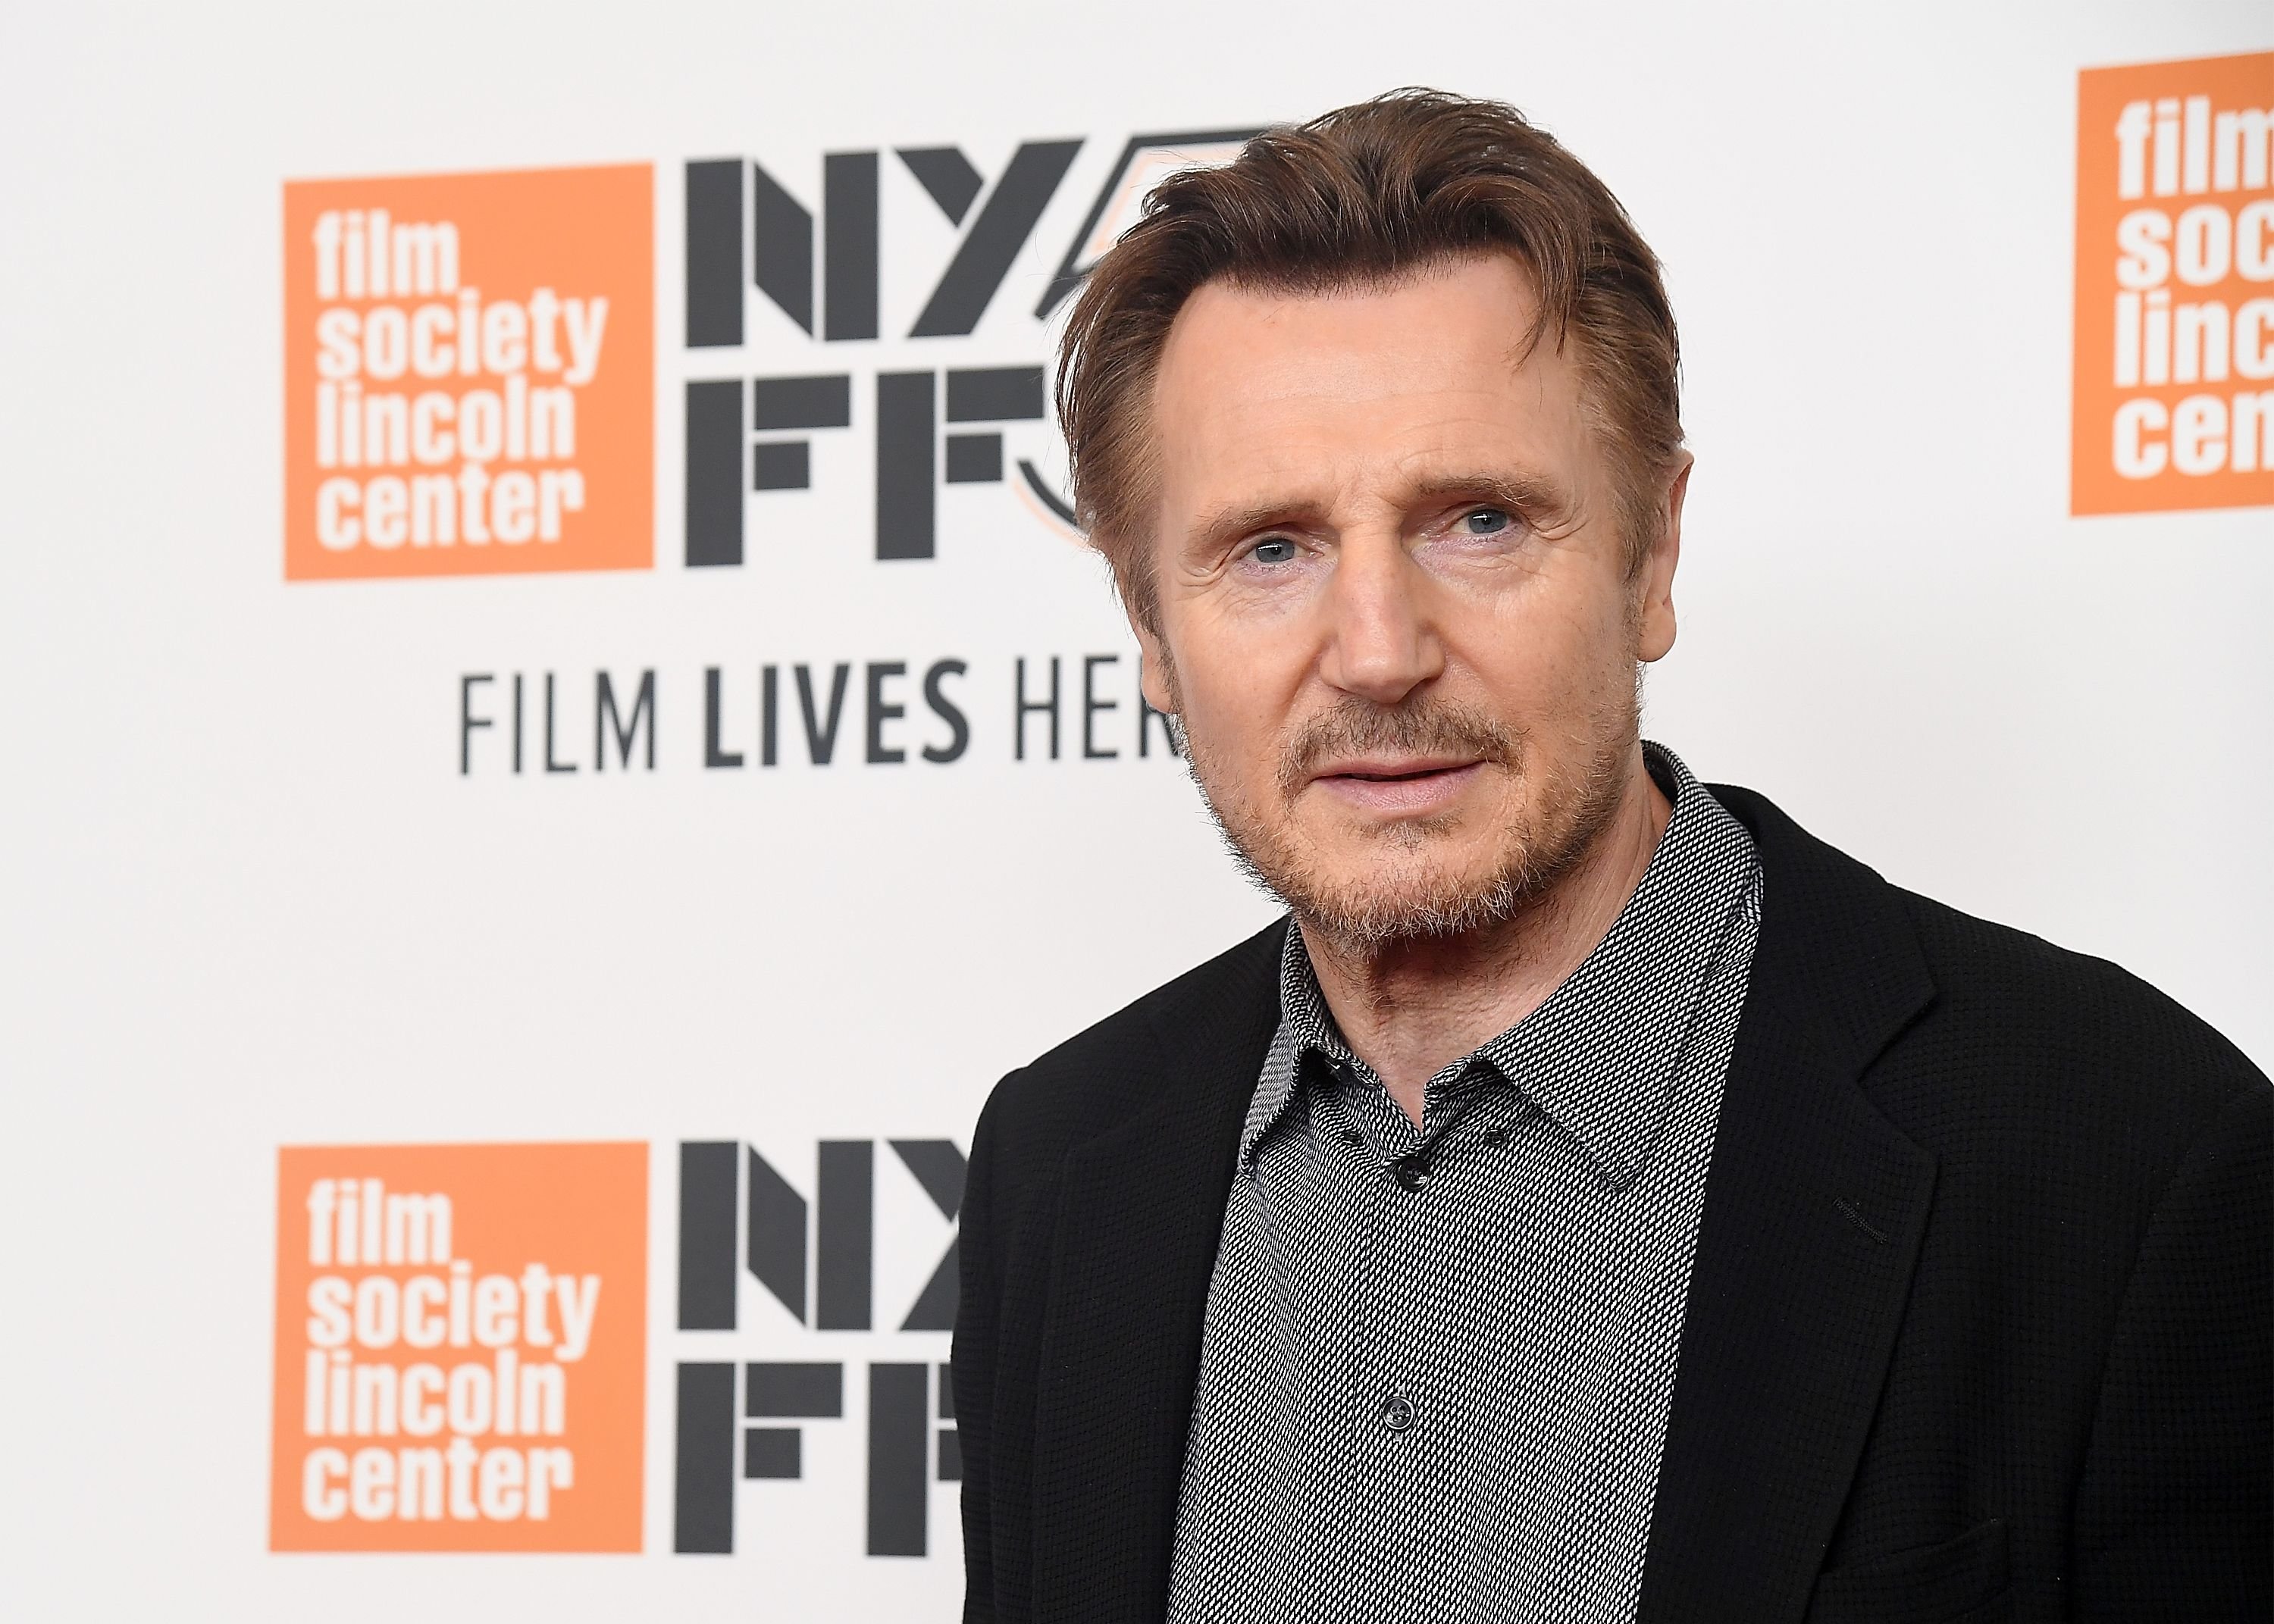 Liam Neeson at the screening of "The Ballad of Buster Scruggs" during the 56th New York Film Festival on October 4, 2018 | Photo: Nicholas Hunt/Getty Images